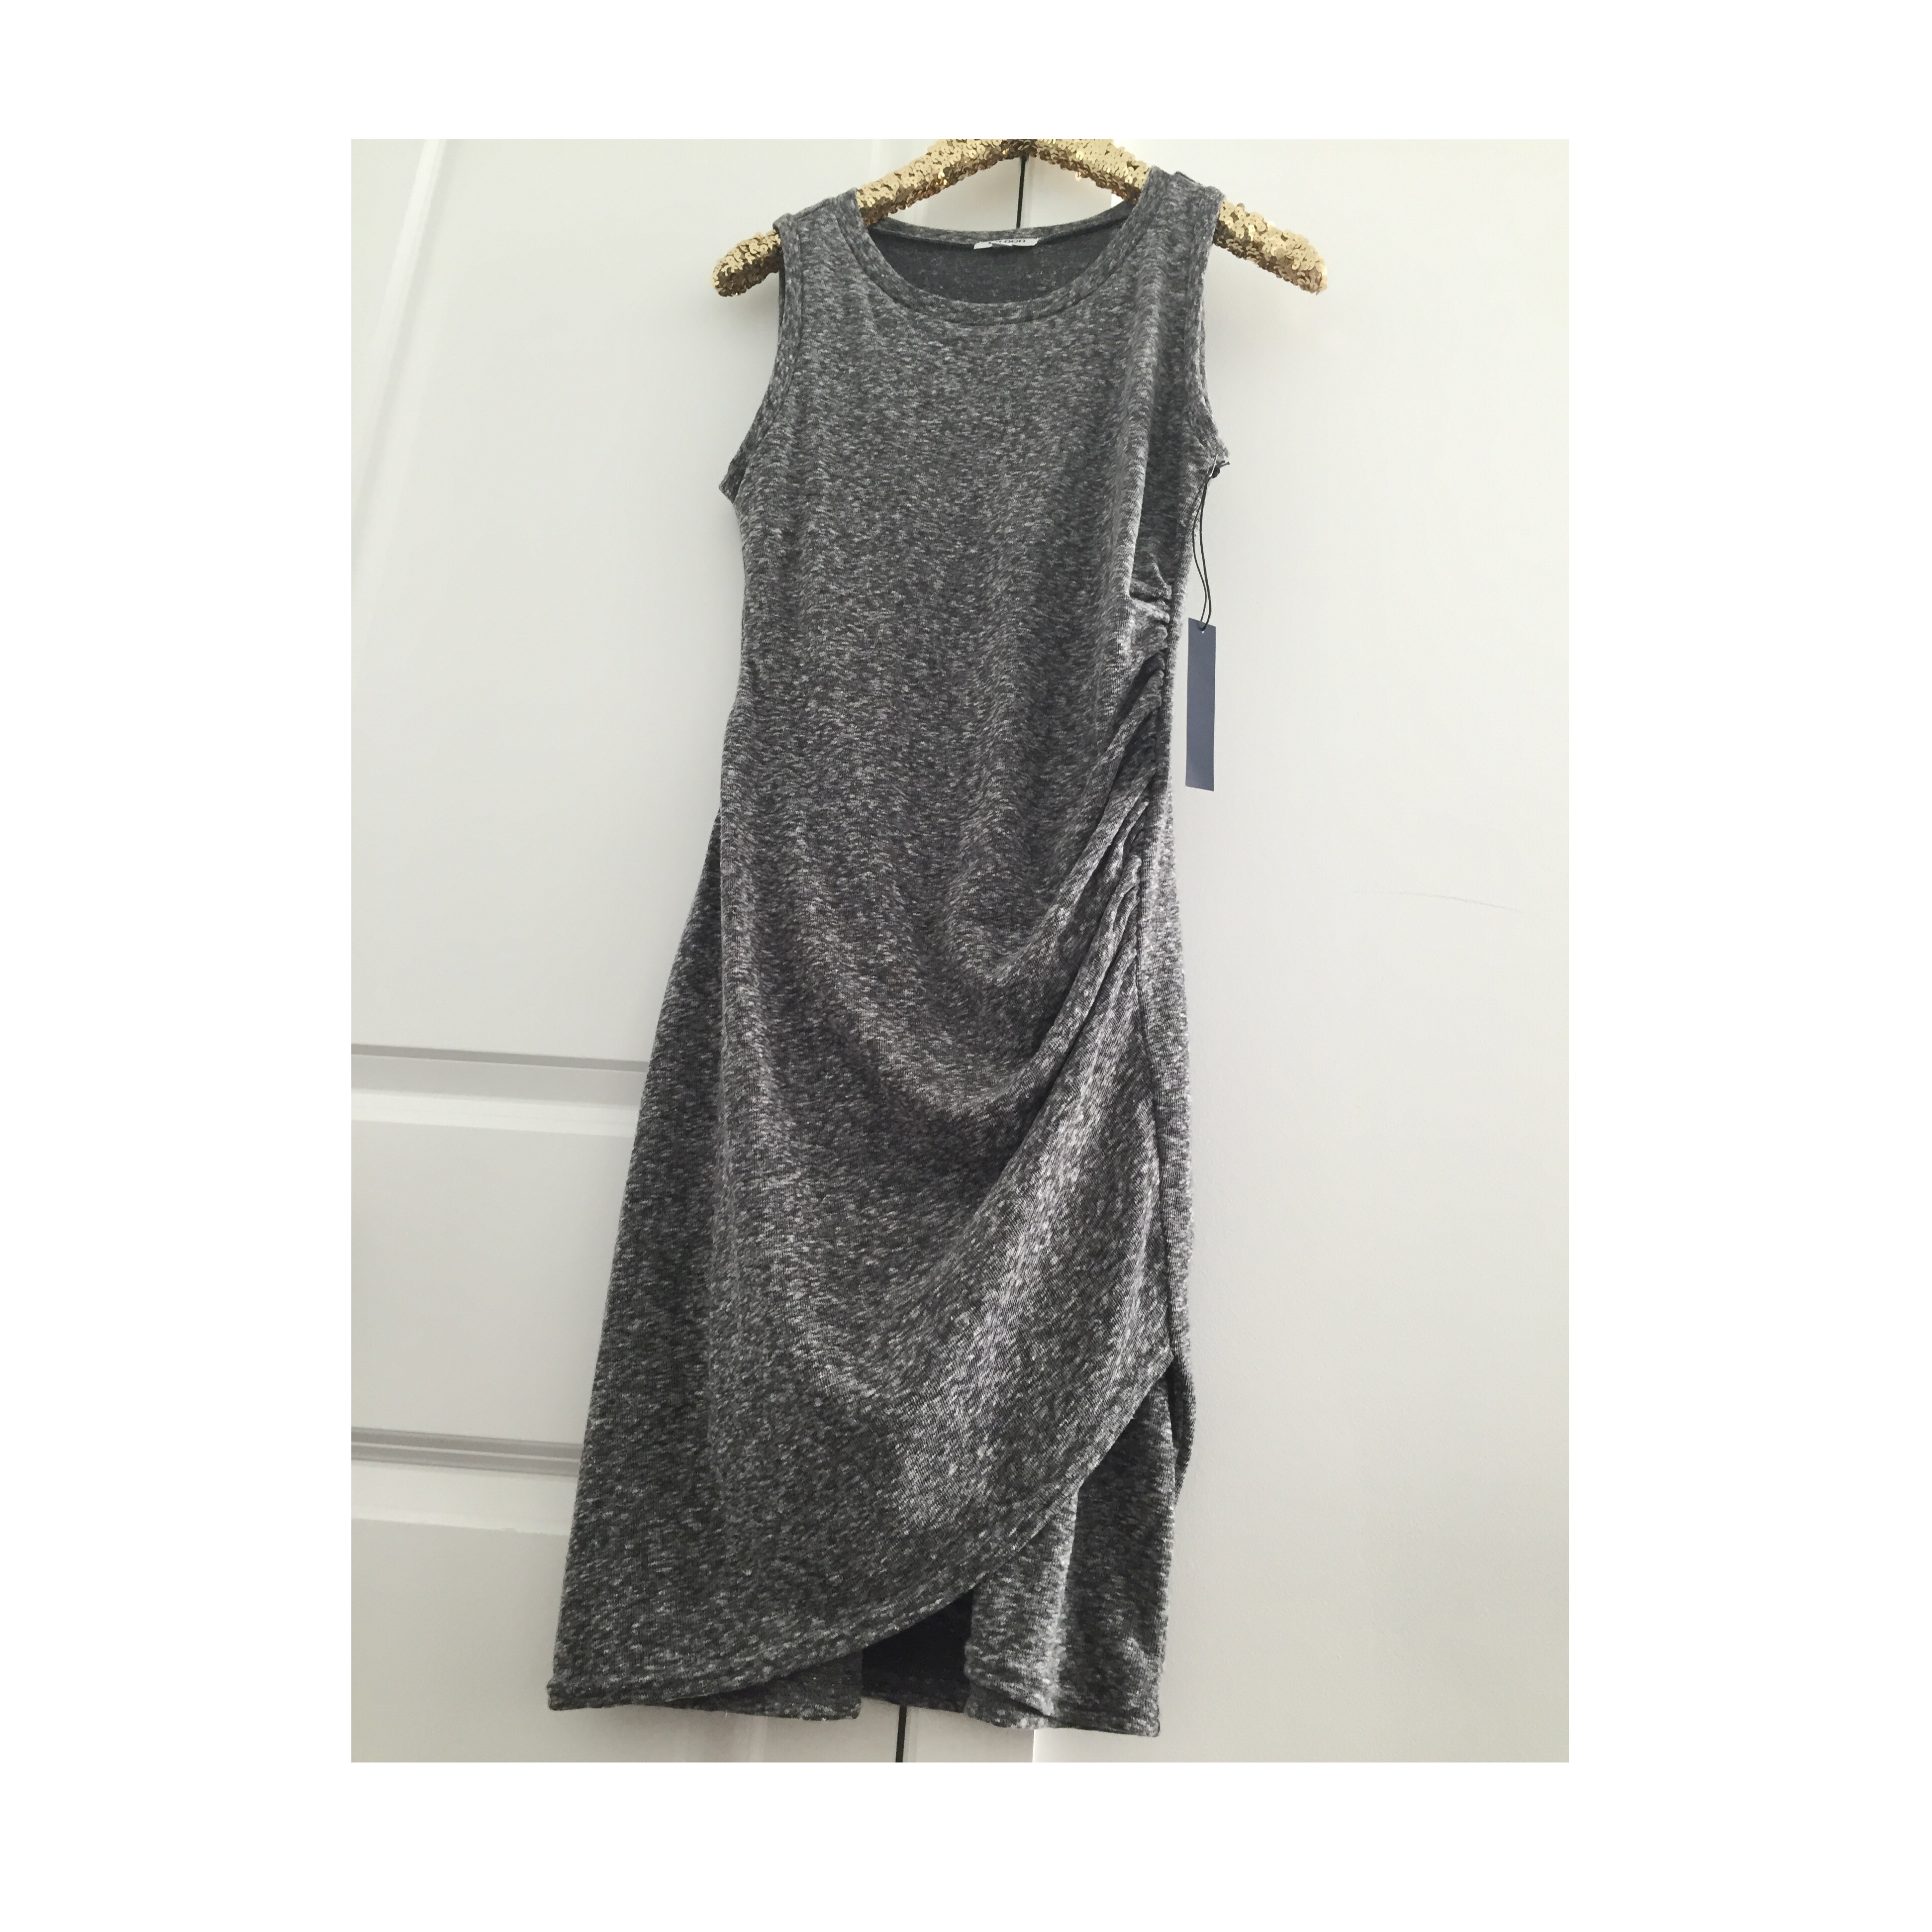 Style | This Fab Heather Grey Dress